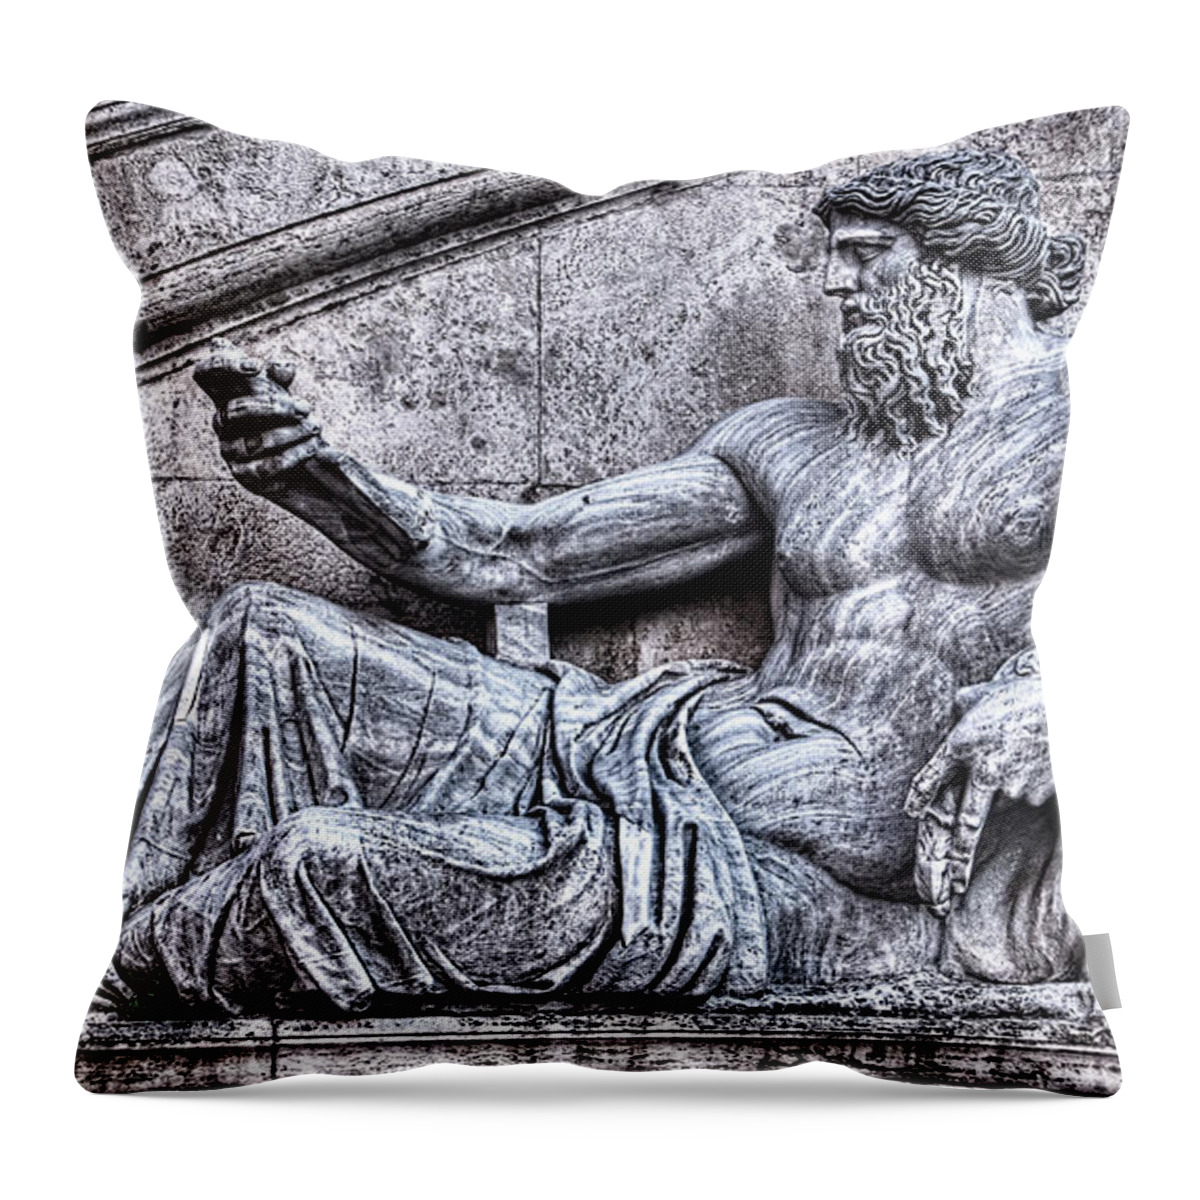 Nile Throw Pillow featuring the photograph The Nile by Weston Westmoreland